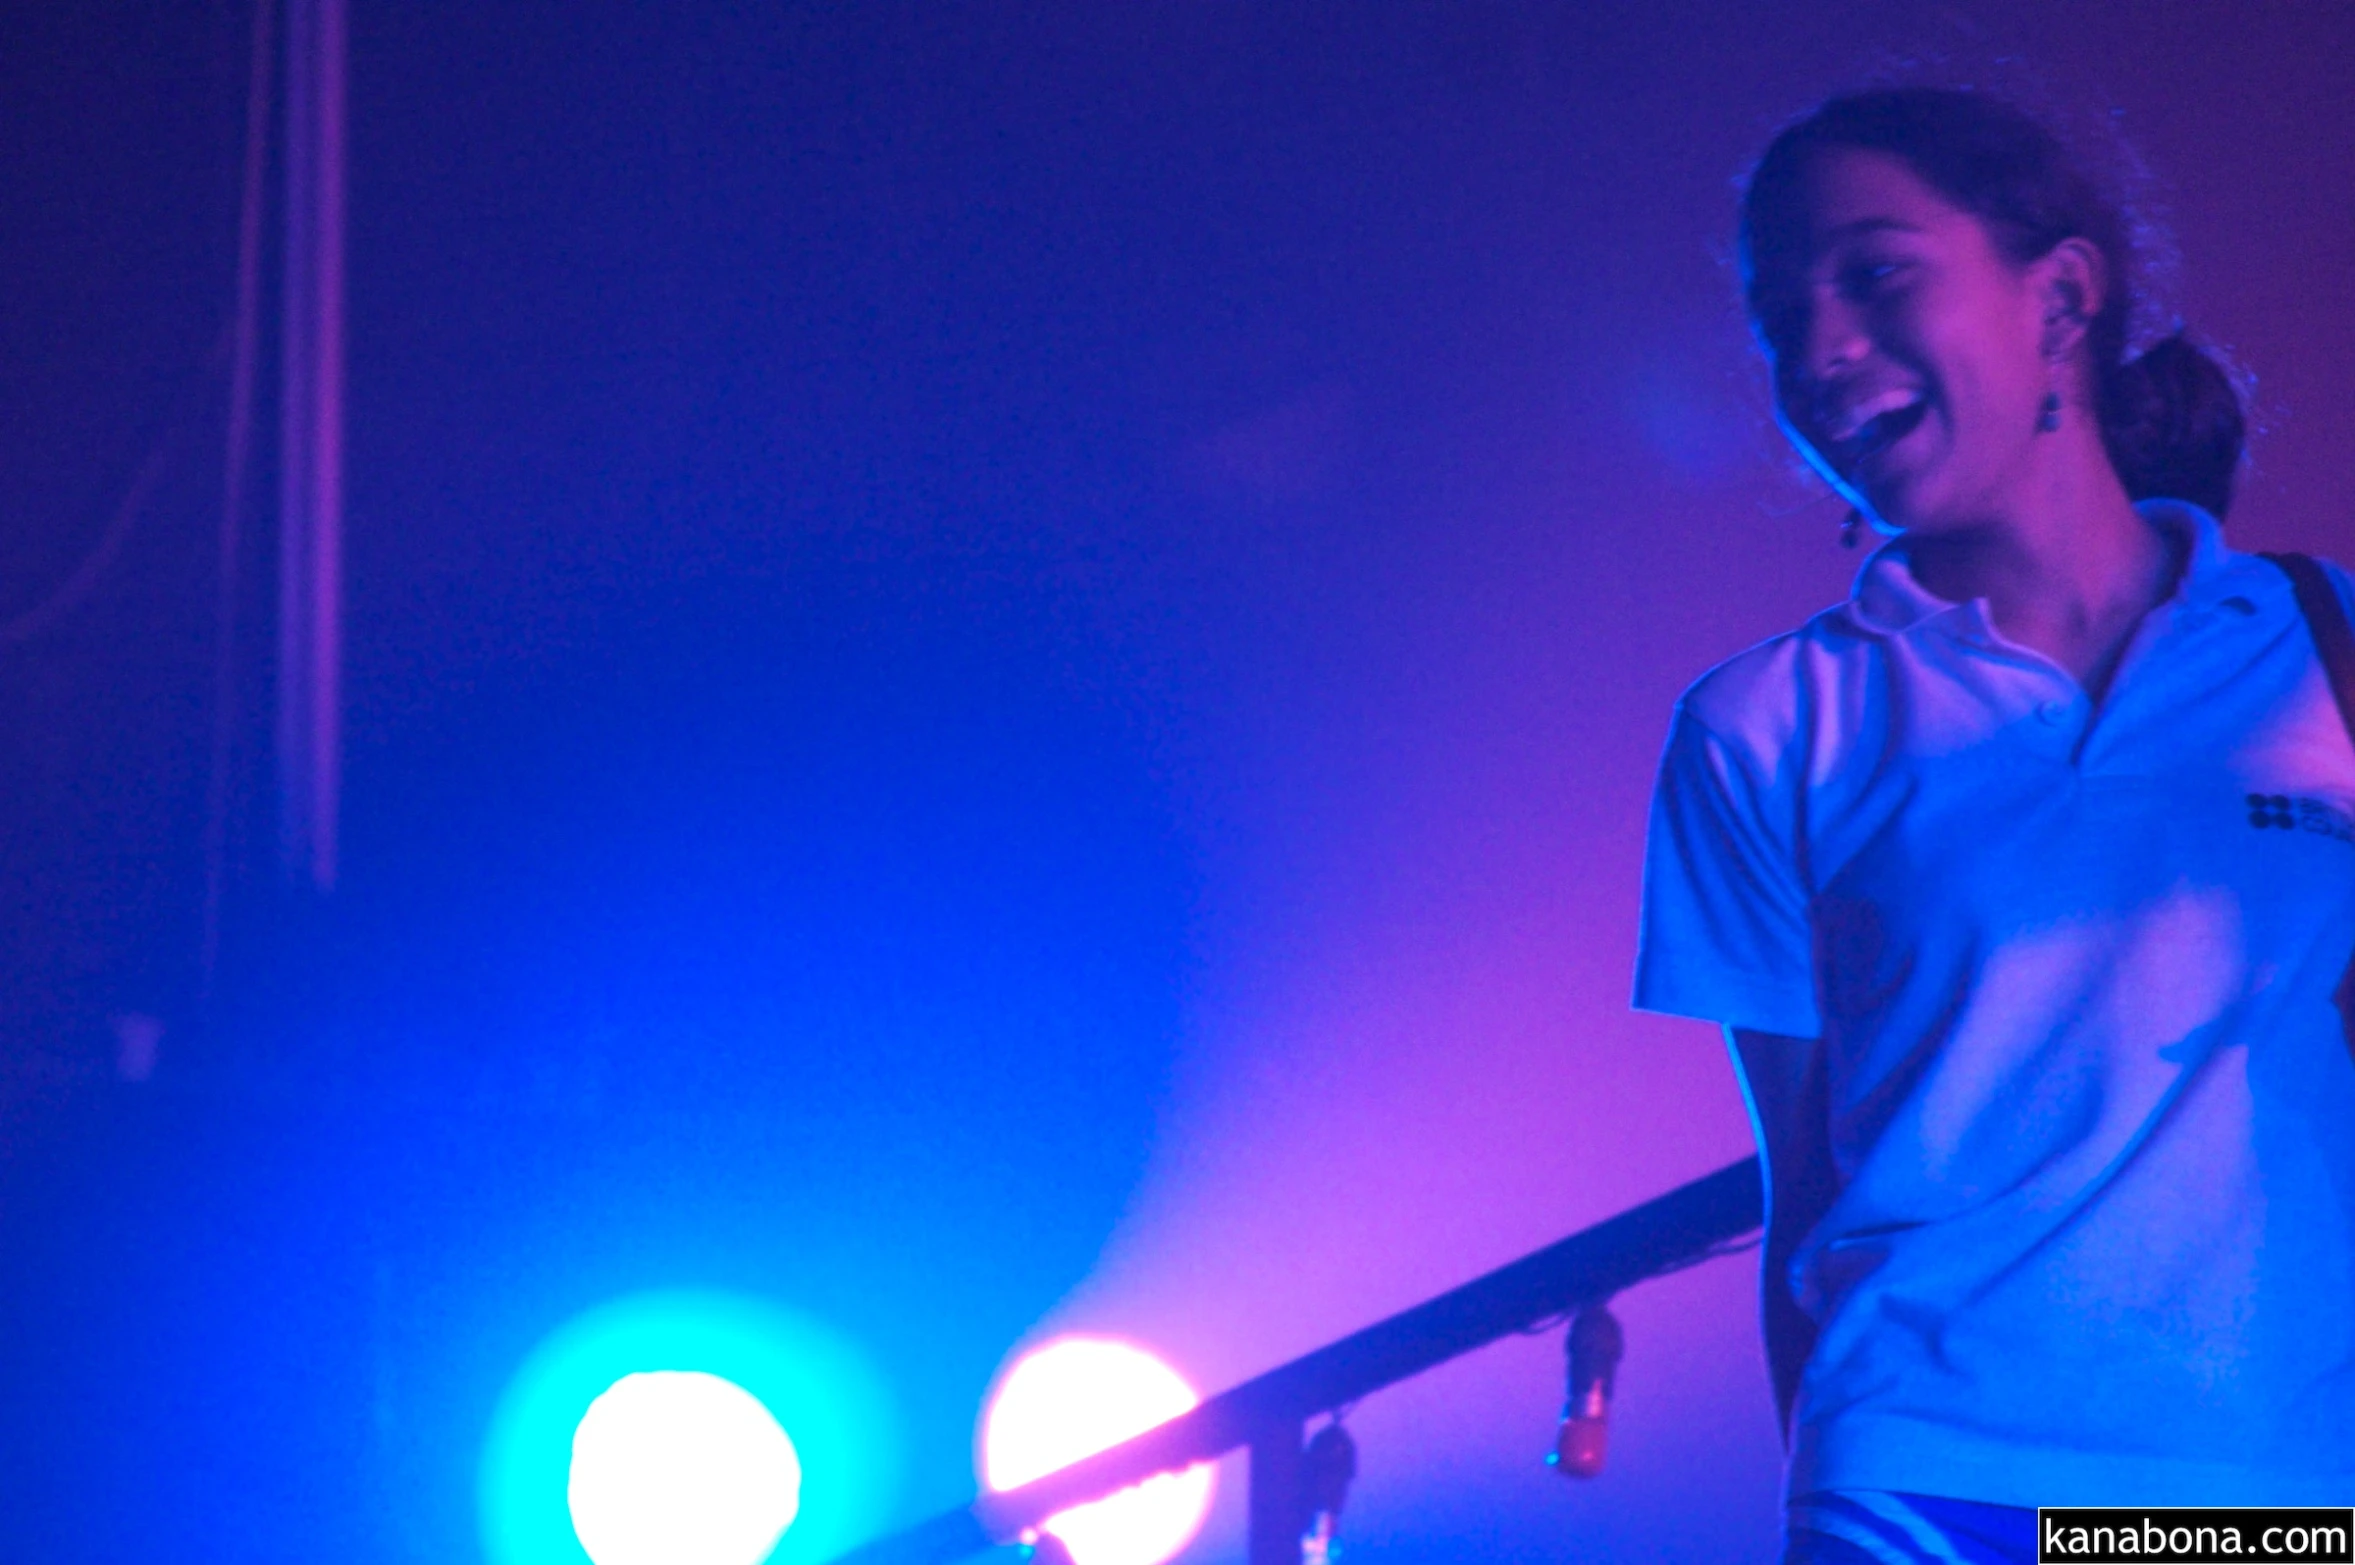 a woman on stage smiling as the lights turn on